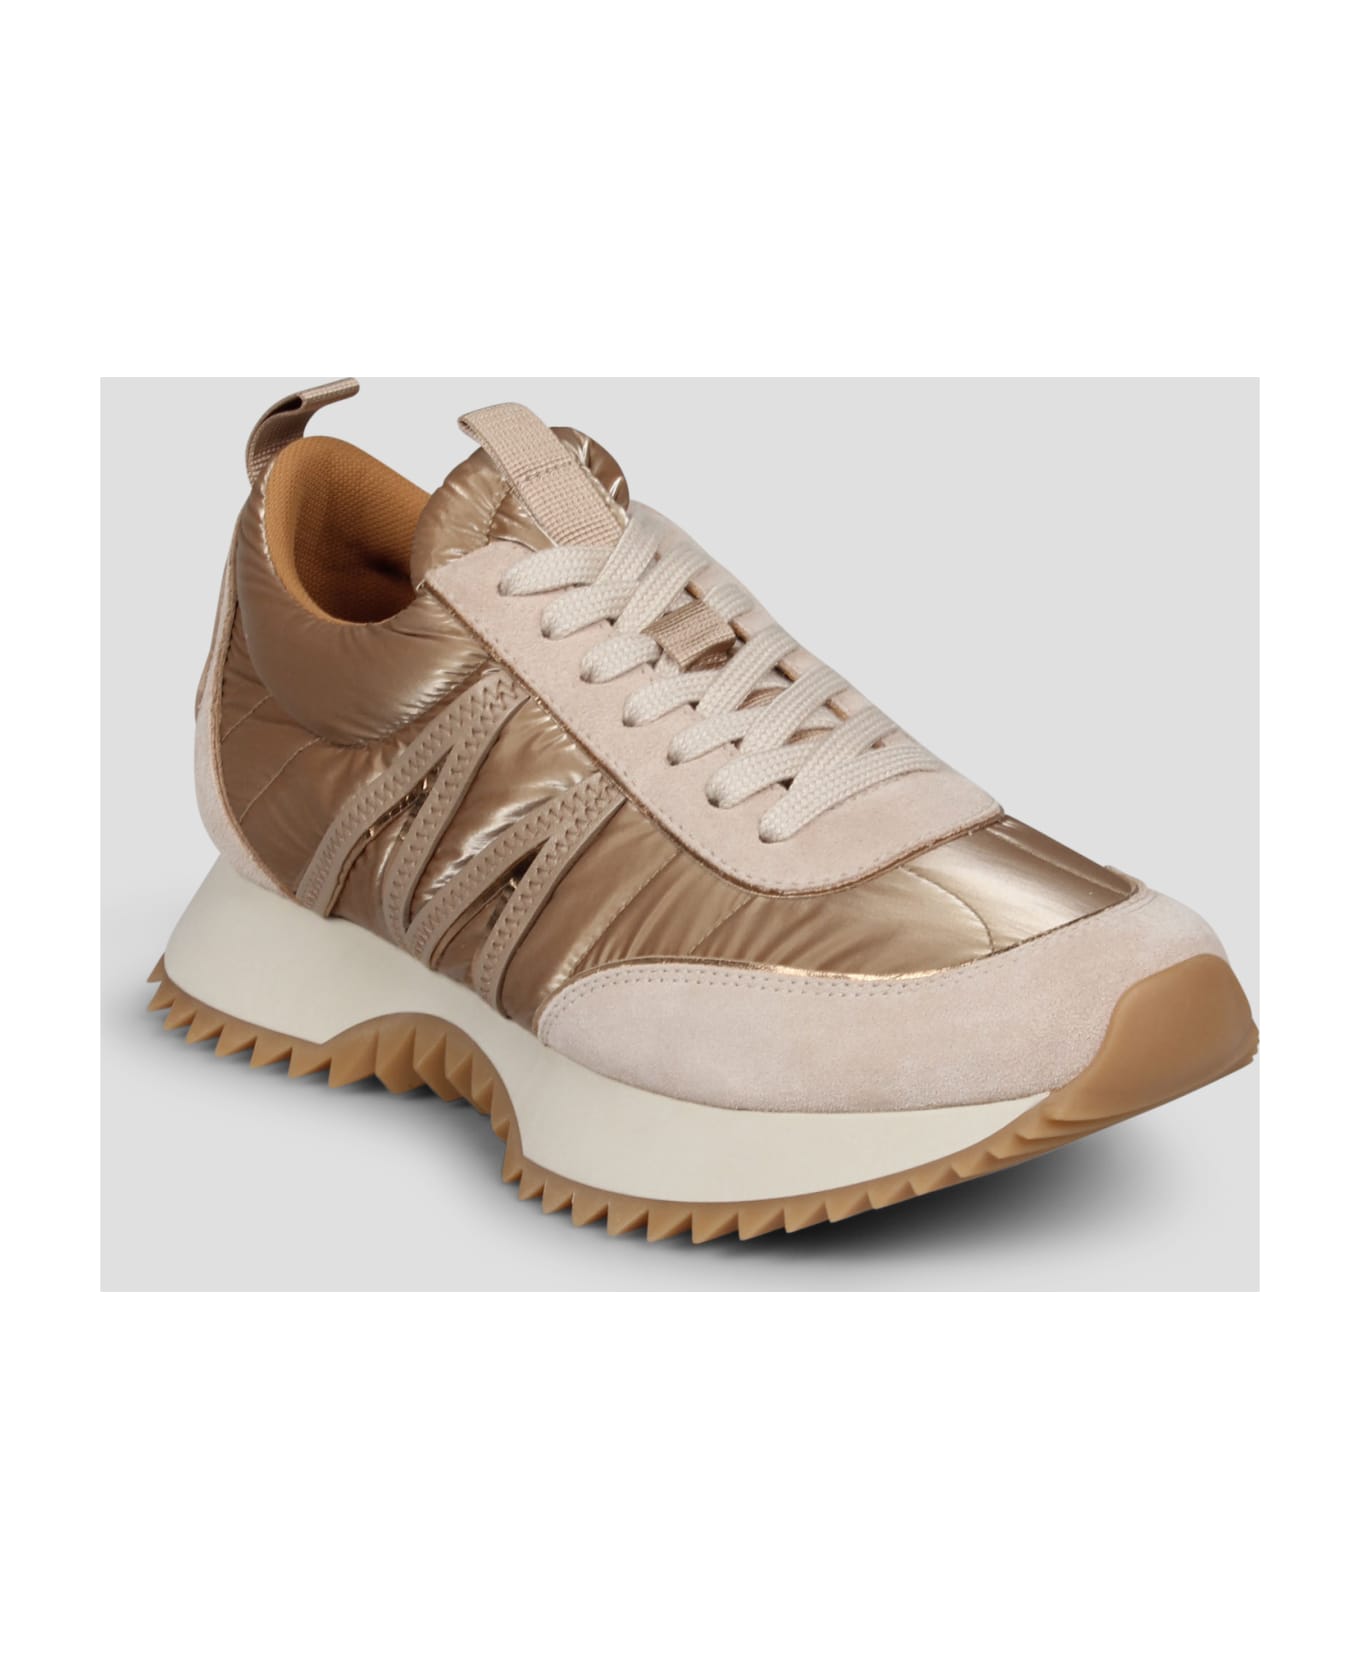 Moncler Round Toe Lace-up Sneakers - Nude & Neutrals